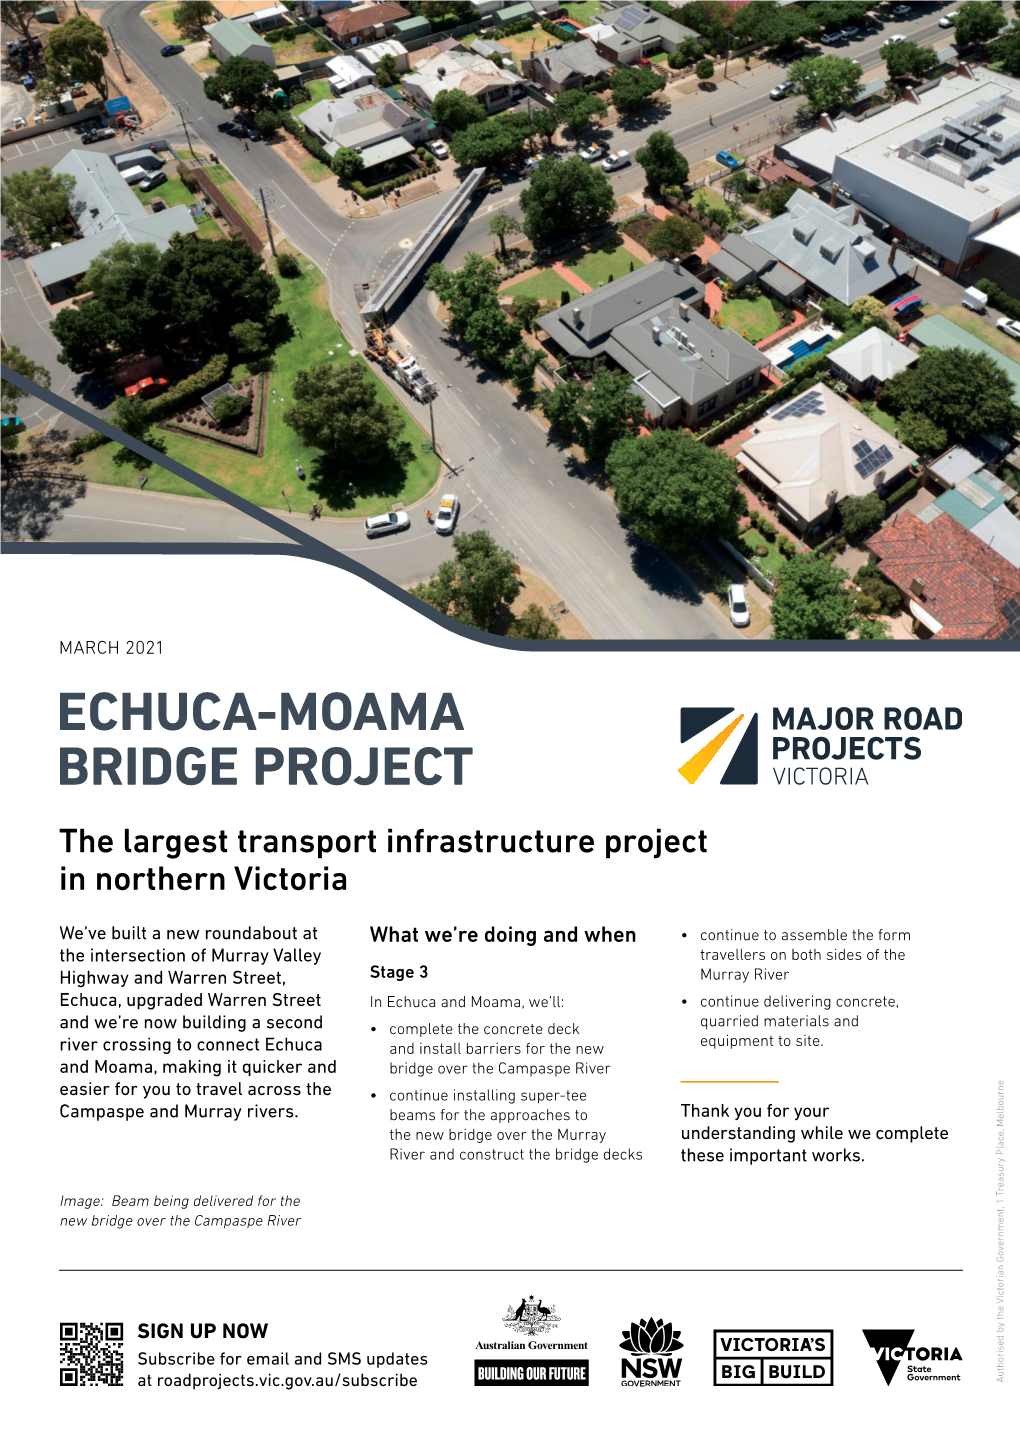 ECHUCA-MOAMA BRIDGE PROJECT the Largest Transport Infrastructure Project in Northern Victoria